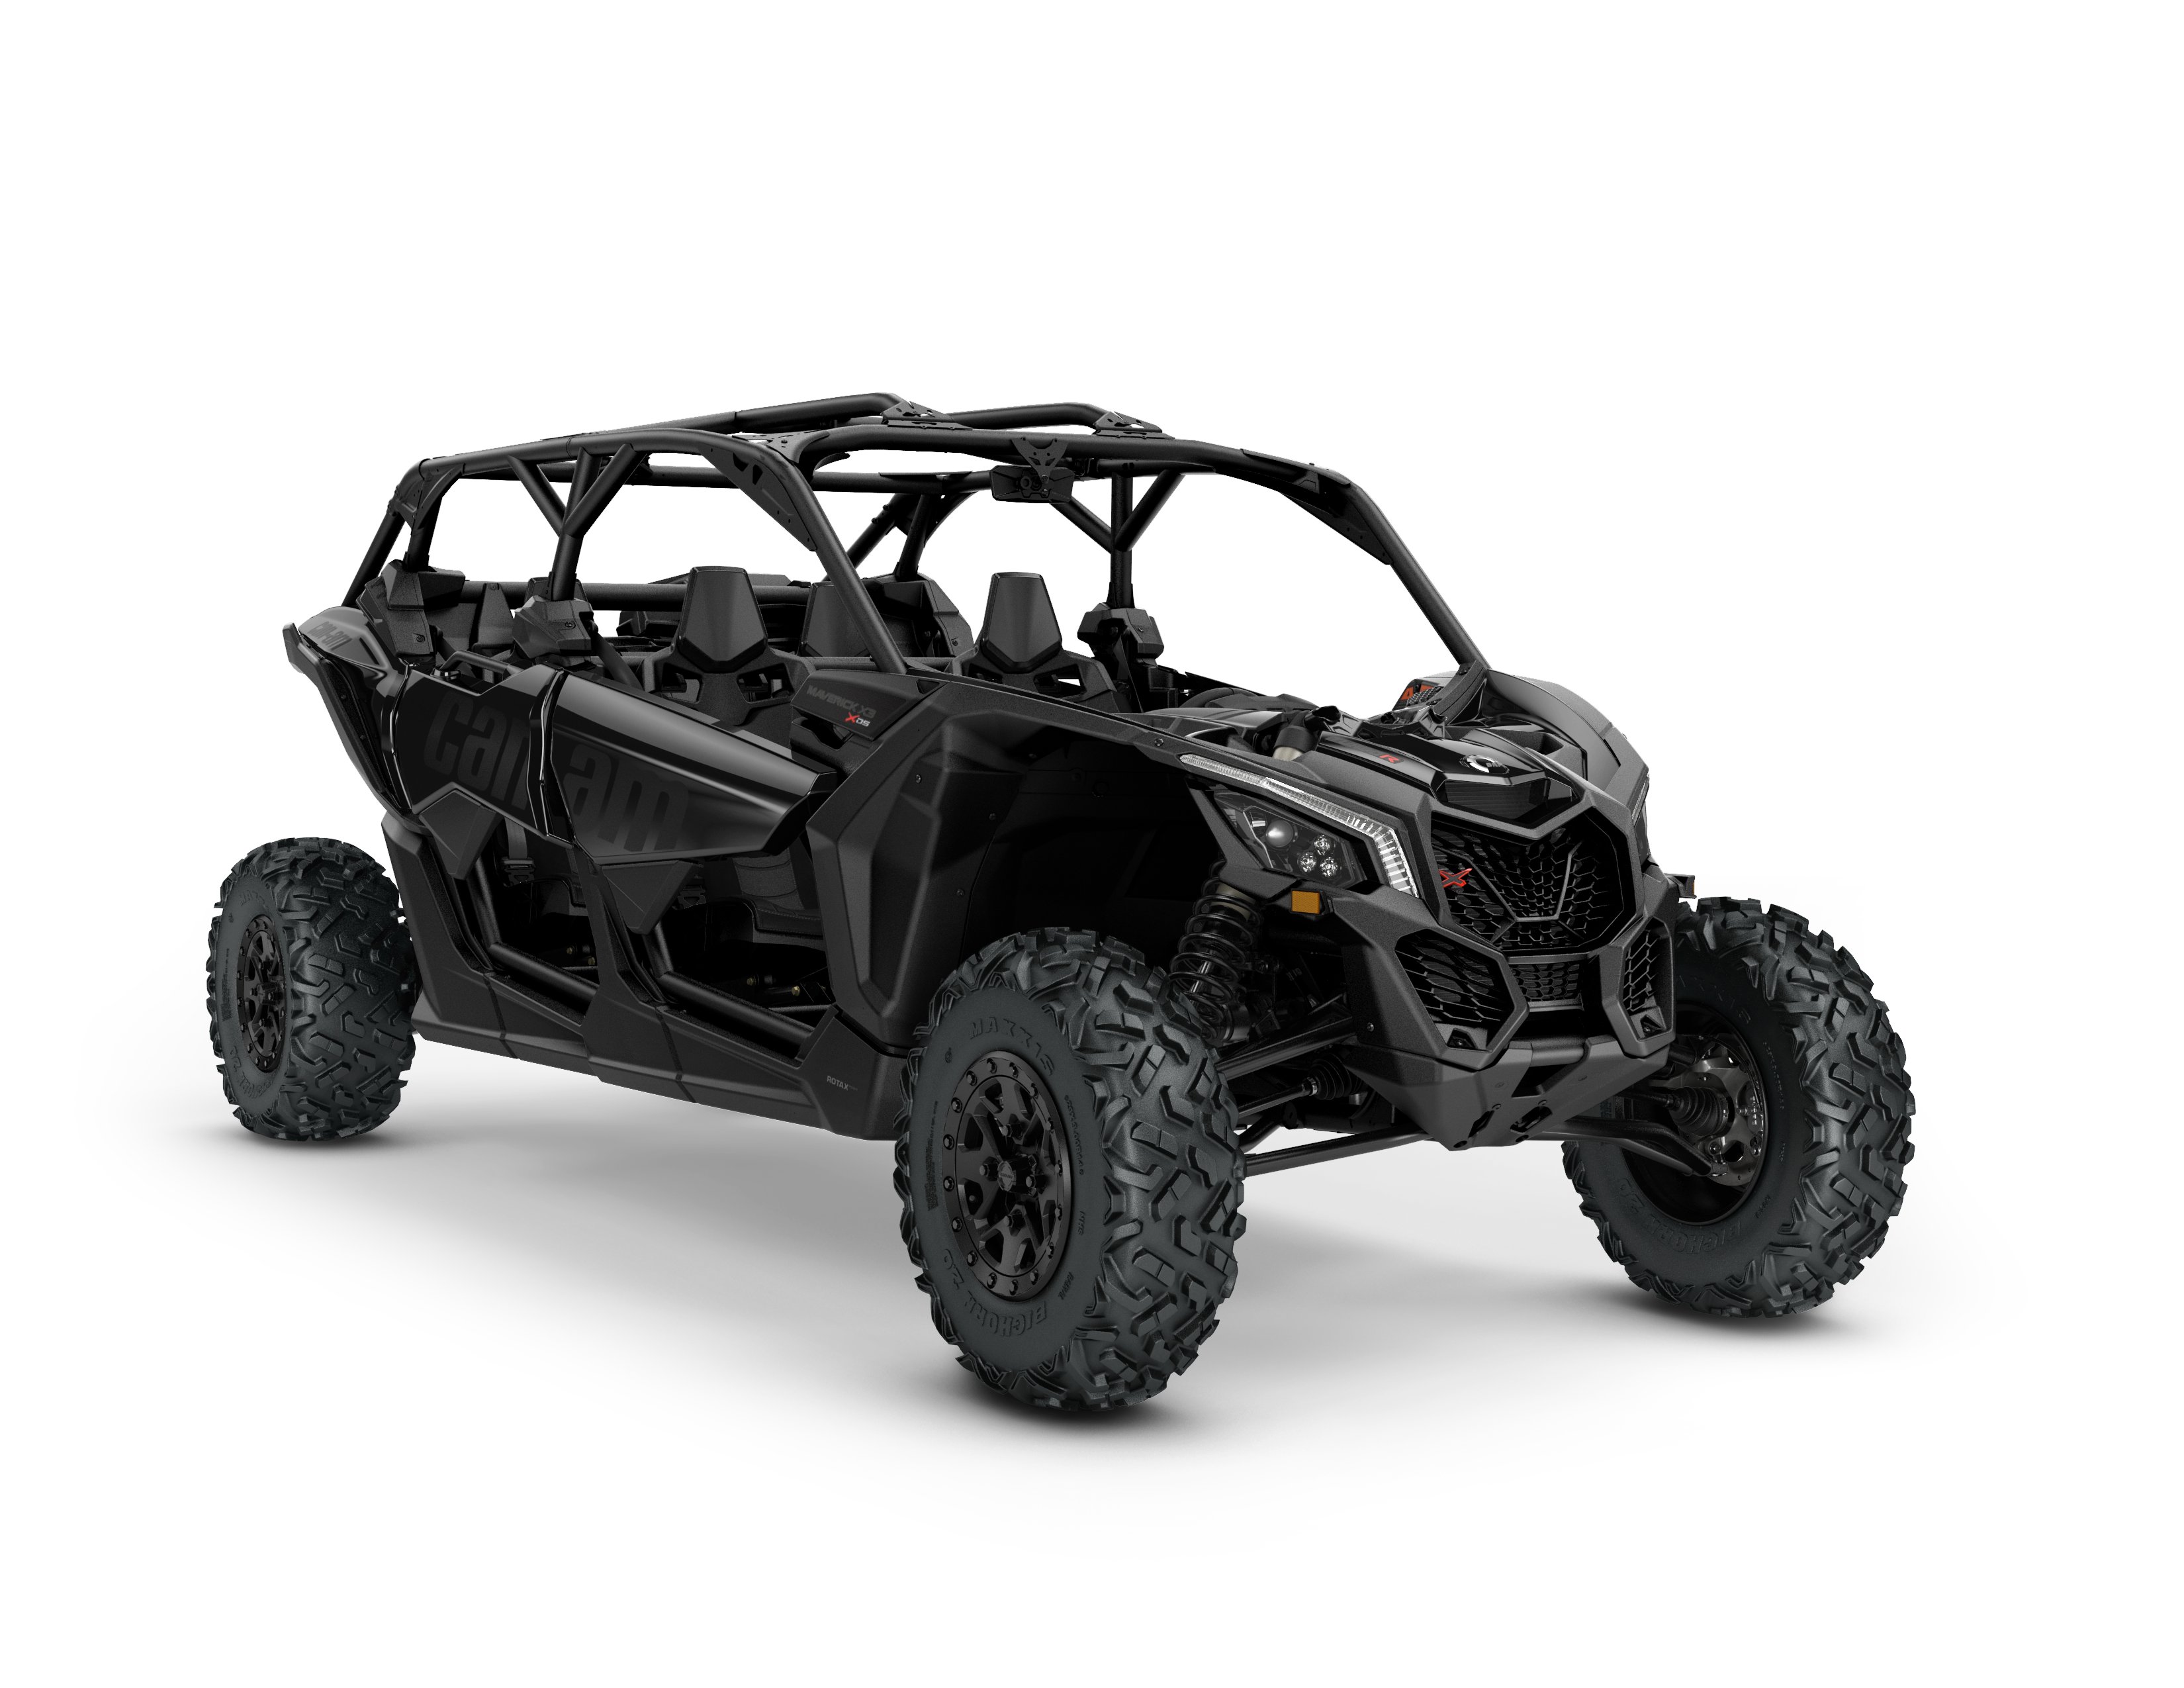 replace #705009508 UTV Front Facia Fit For 2017 2018 Can Am Maverick X3 2 seater/ X3 MAX 4 seater model 